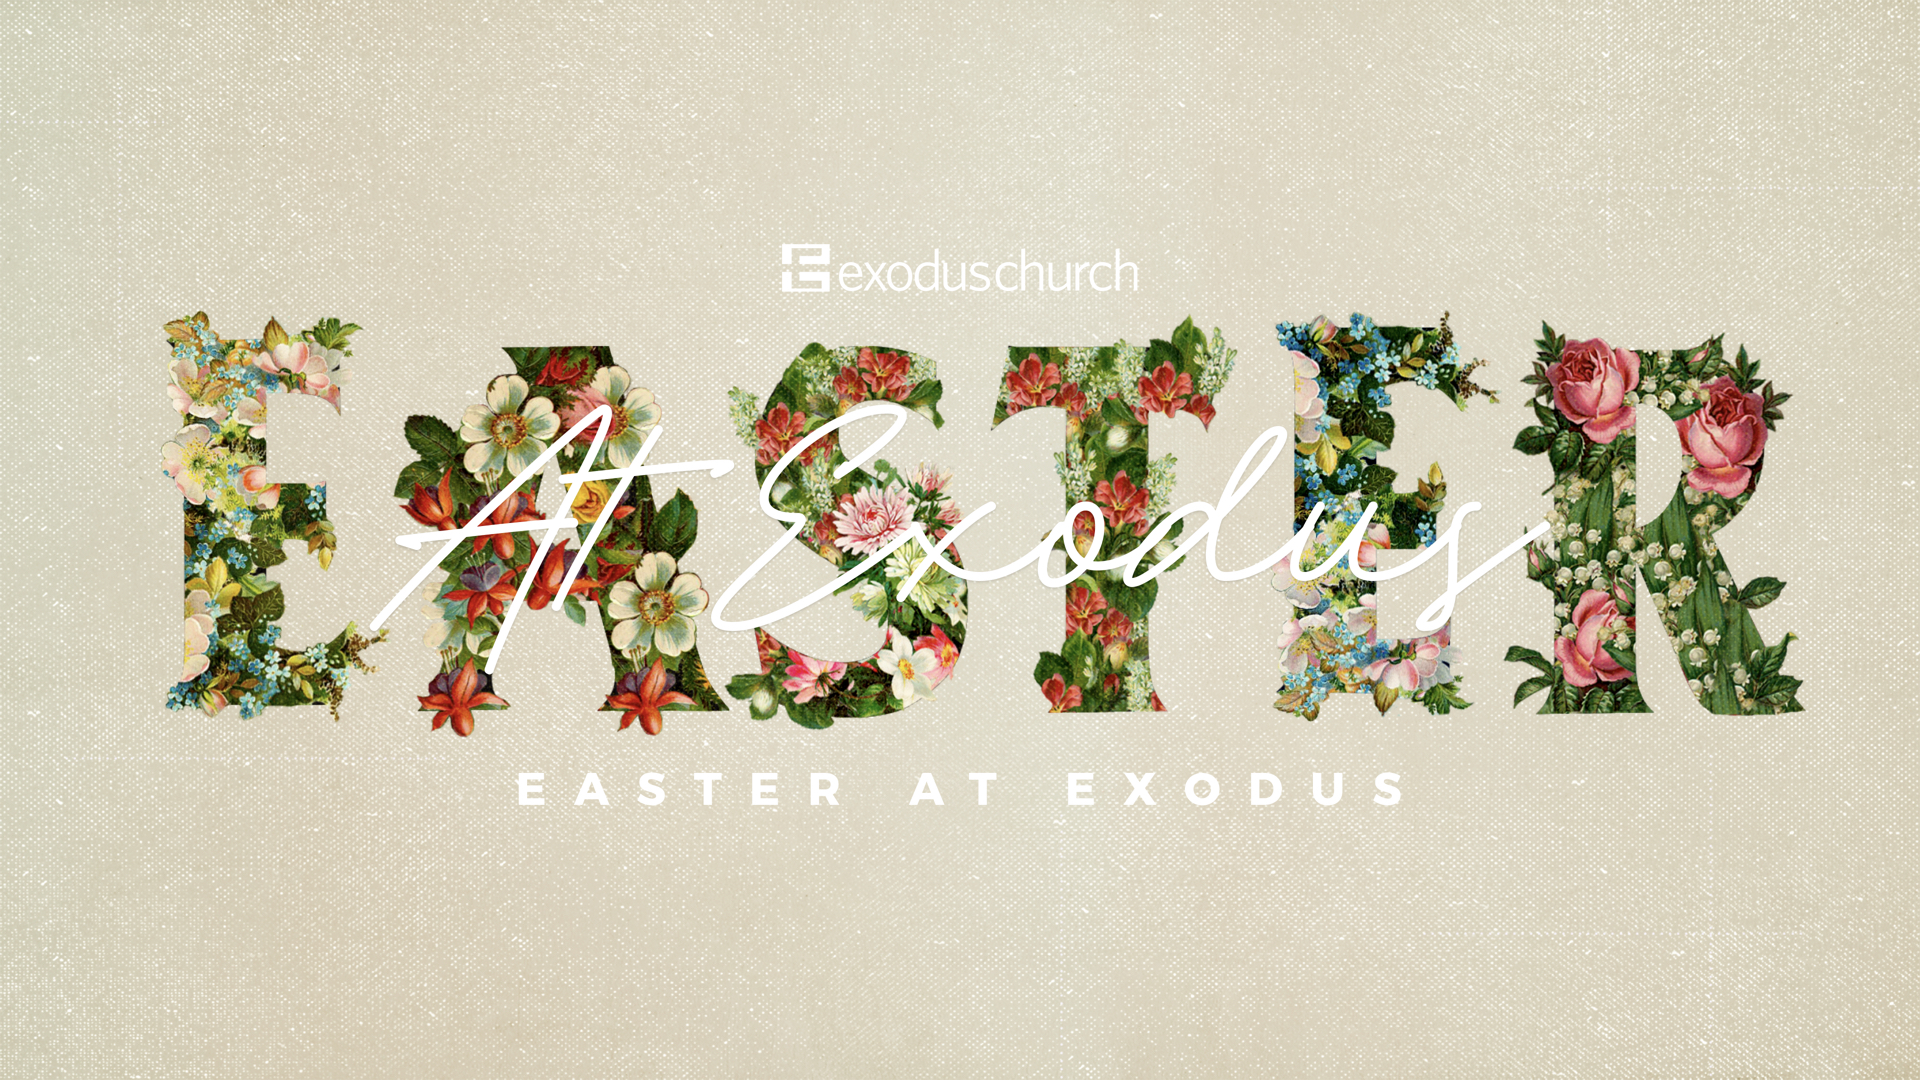 EASTER AT EXODUS